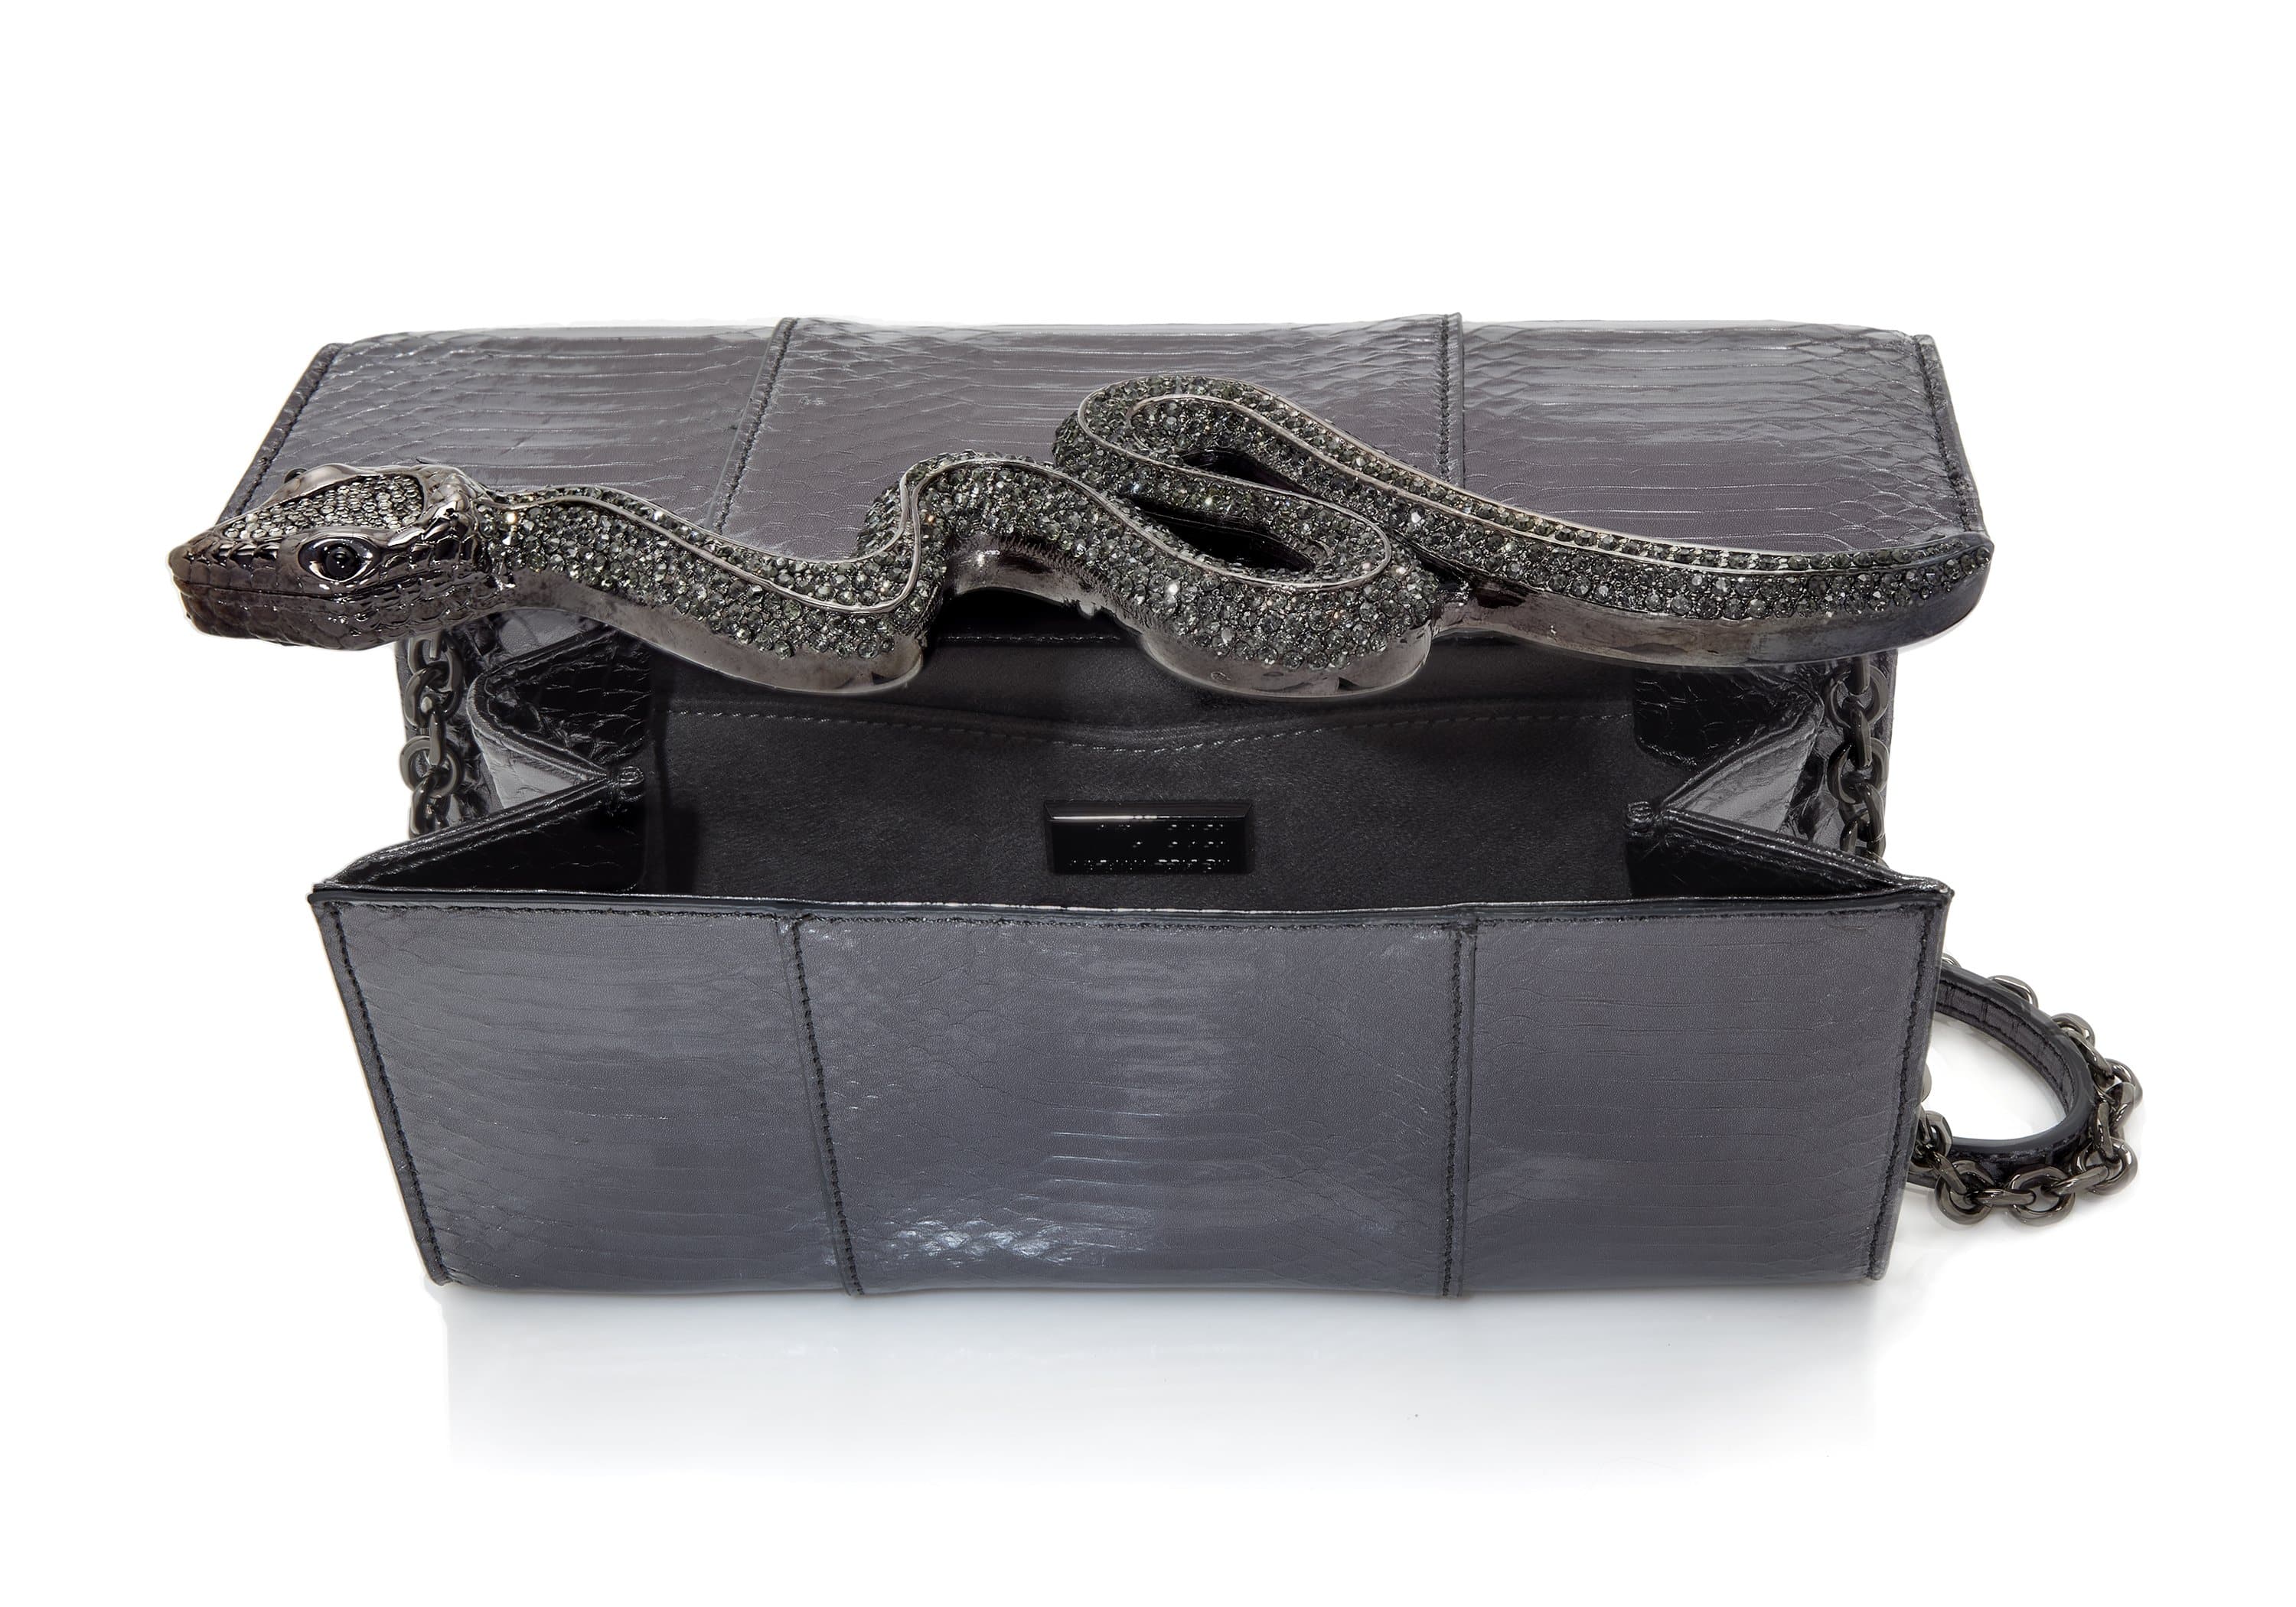 Grey Embossed Snakeskin Quilted Clutch